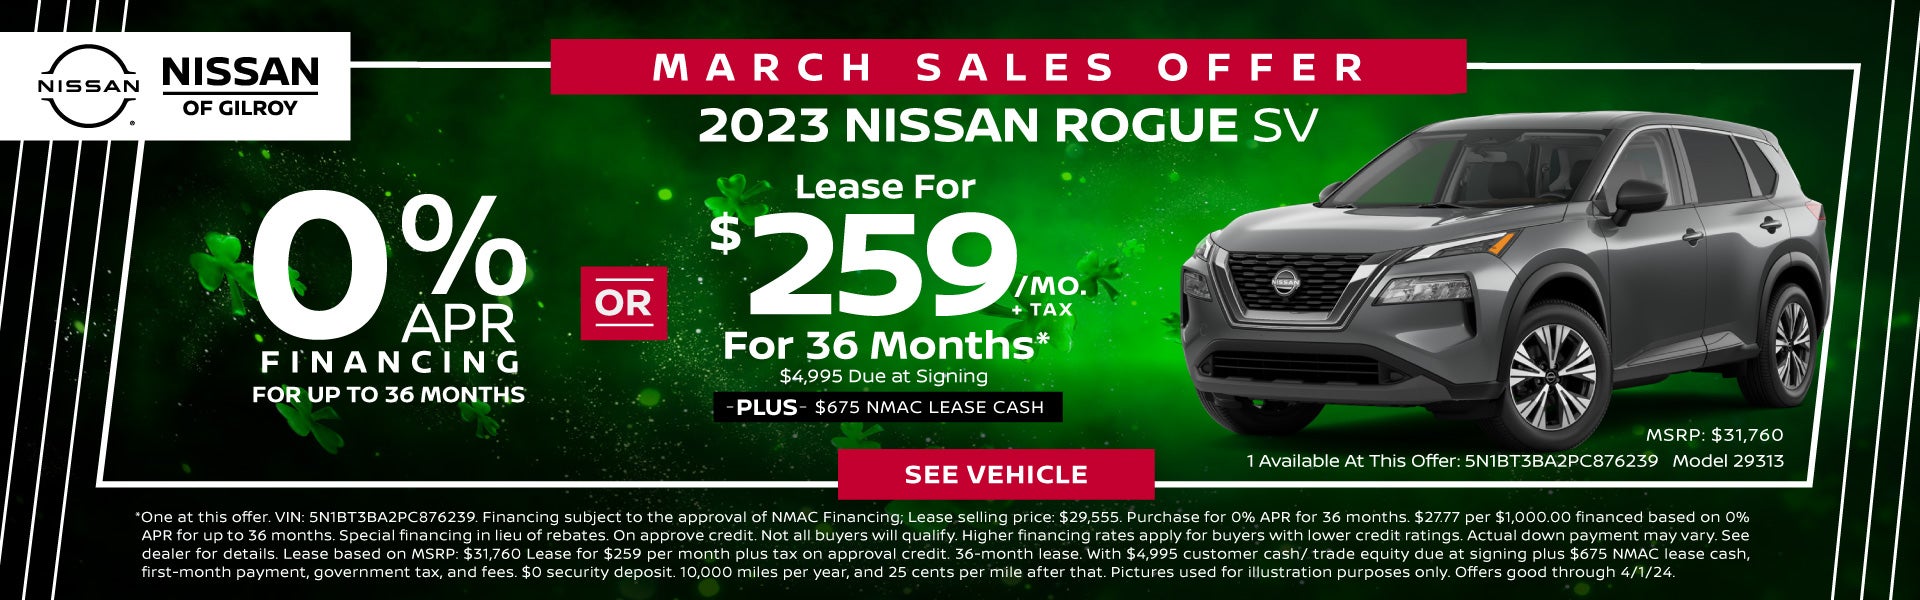 2023 Nissan Rogue SV March Special!